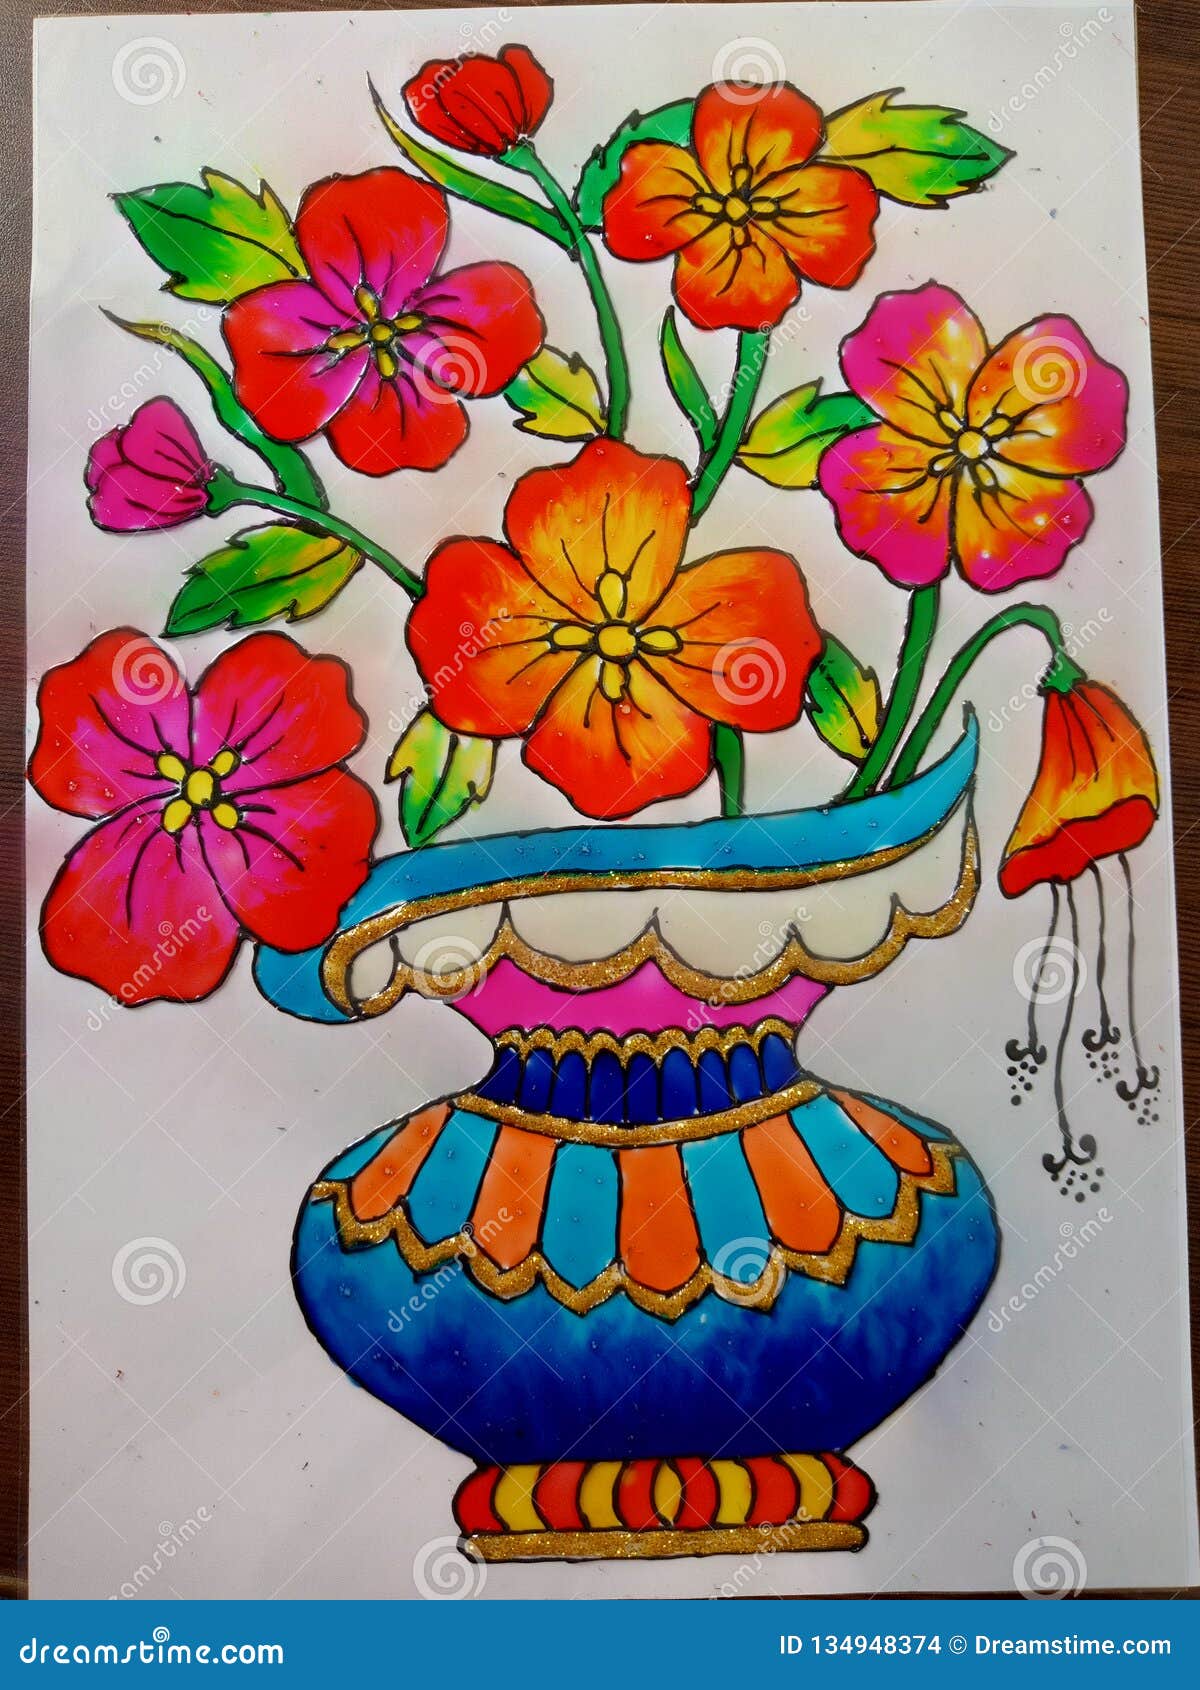 intelectual Aniquilar pantalones Glass painting stock photo. Image of flower, vase, colors - 134948374